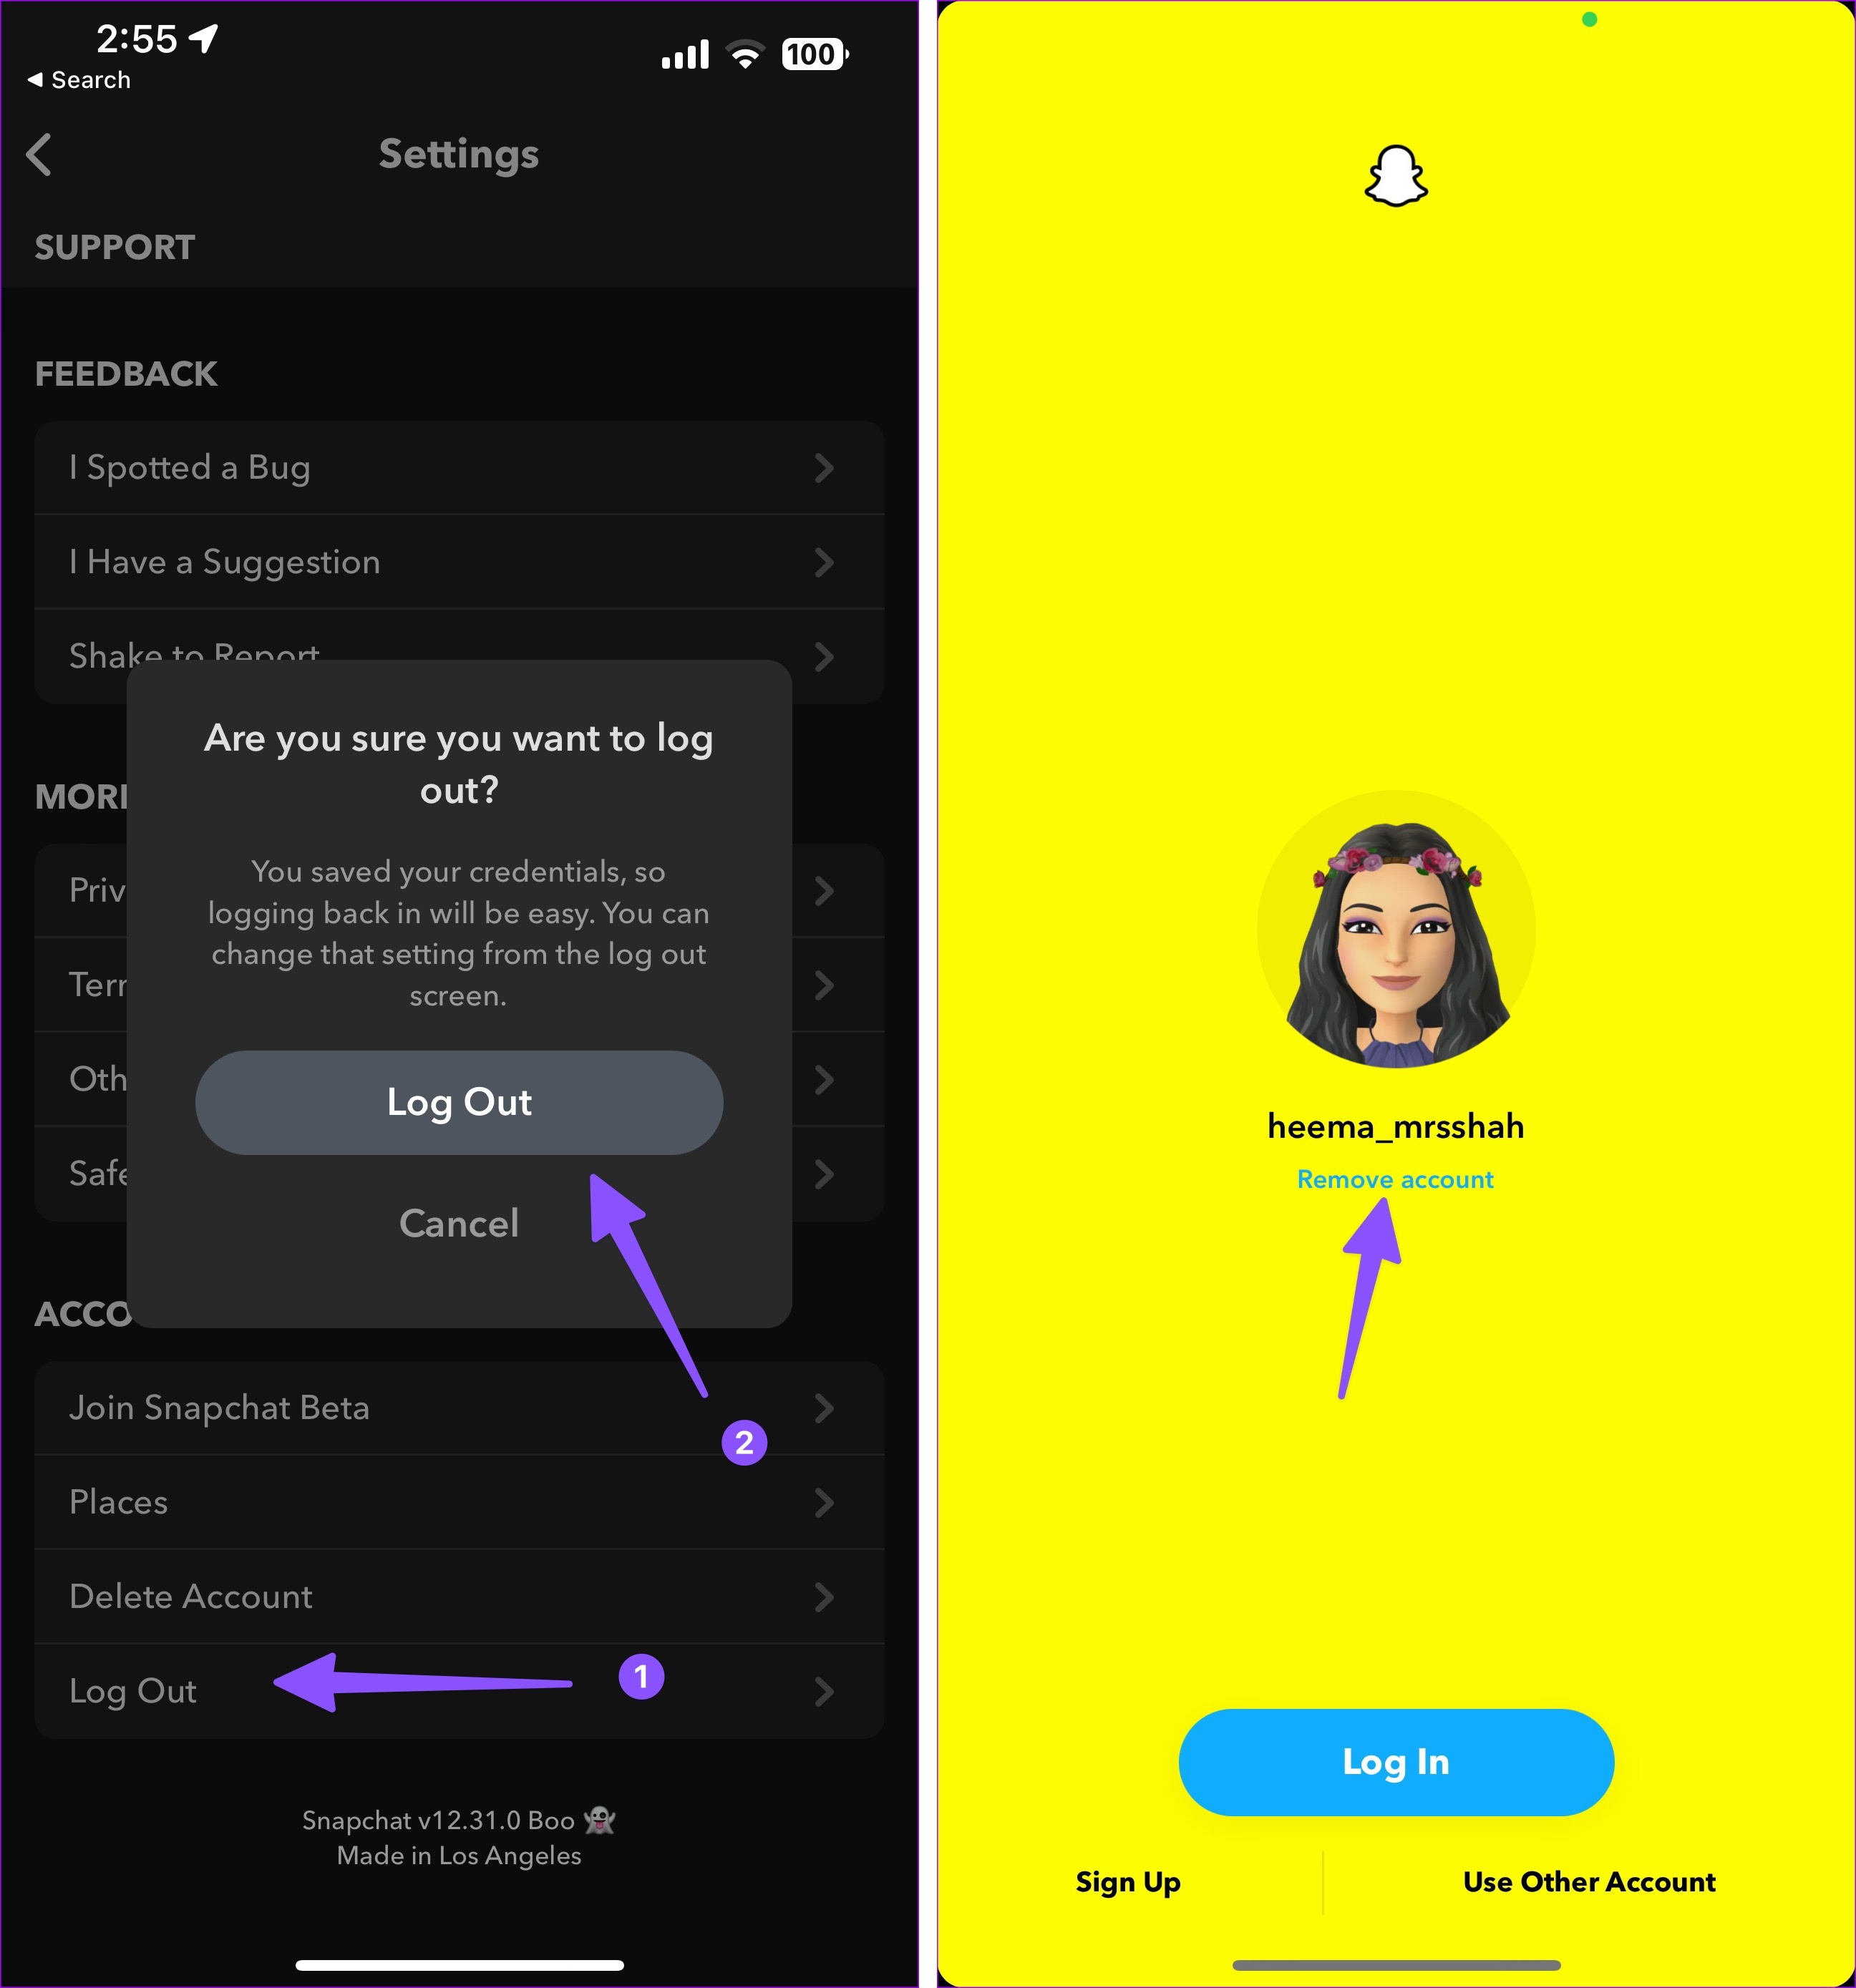 remove saved account on Snapchat